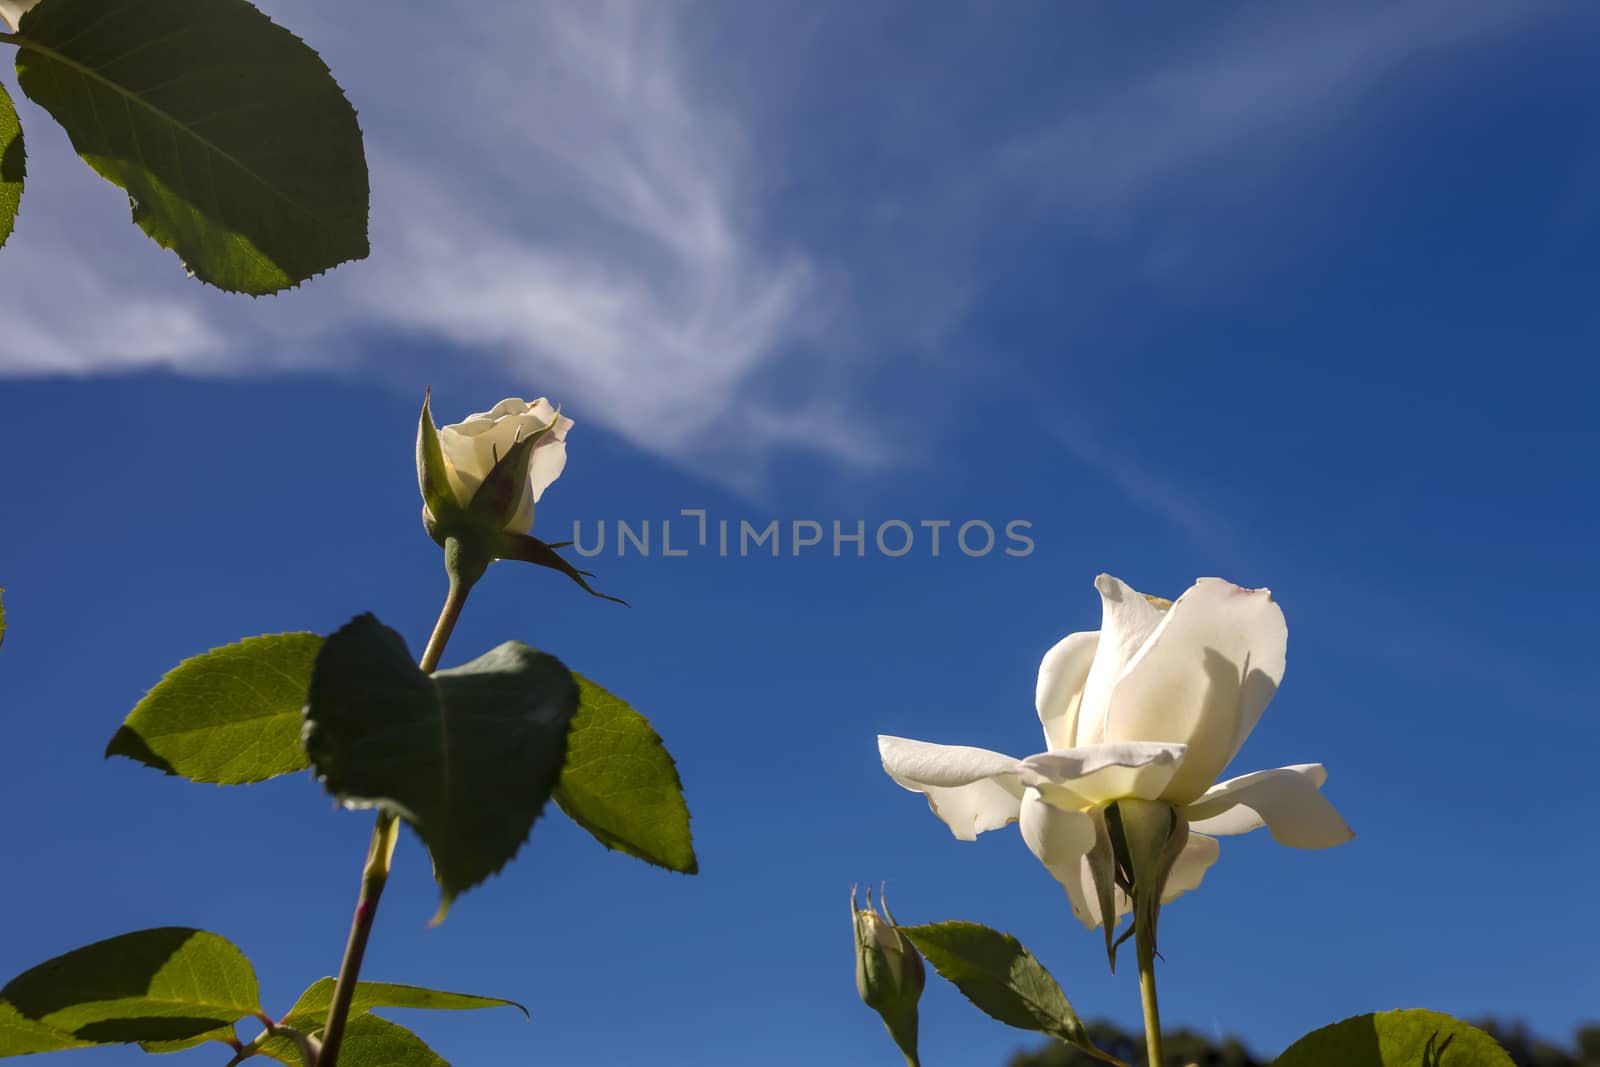 This photo was taken at a formal botanical garden near San Francisco, California. Spring had arrived, and flowers are in bloom. This image features a beautiful white roses flowers and a deep blue sky with wispy clouds.